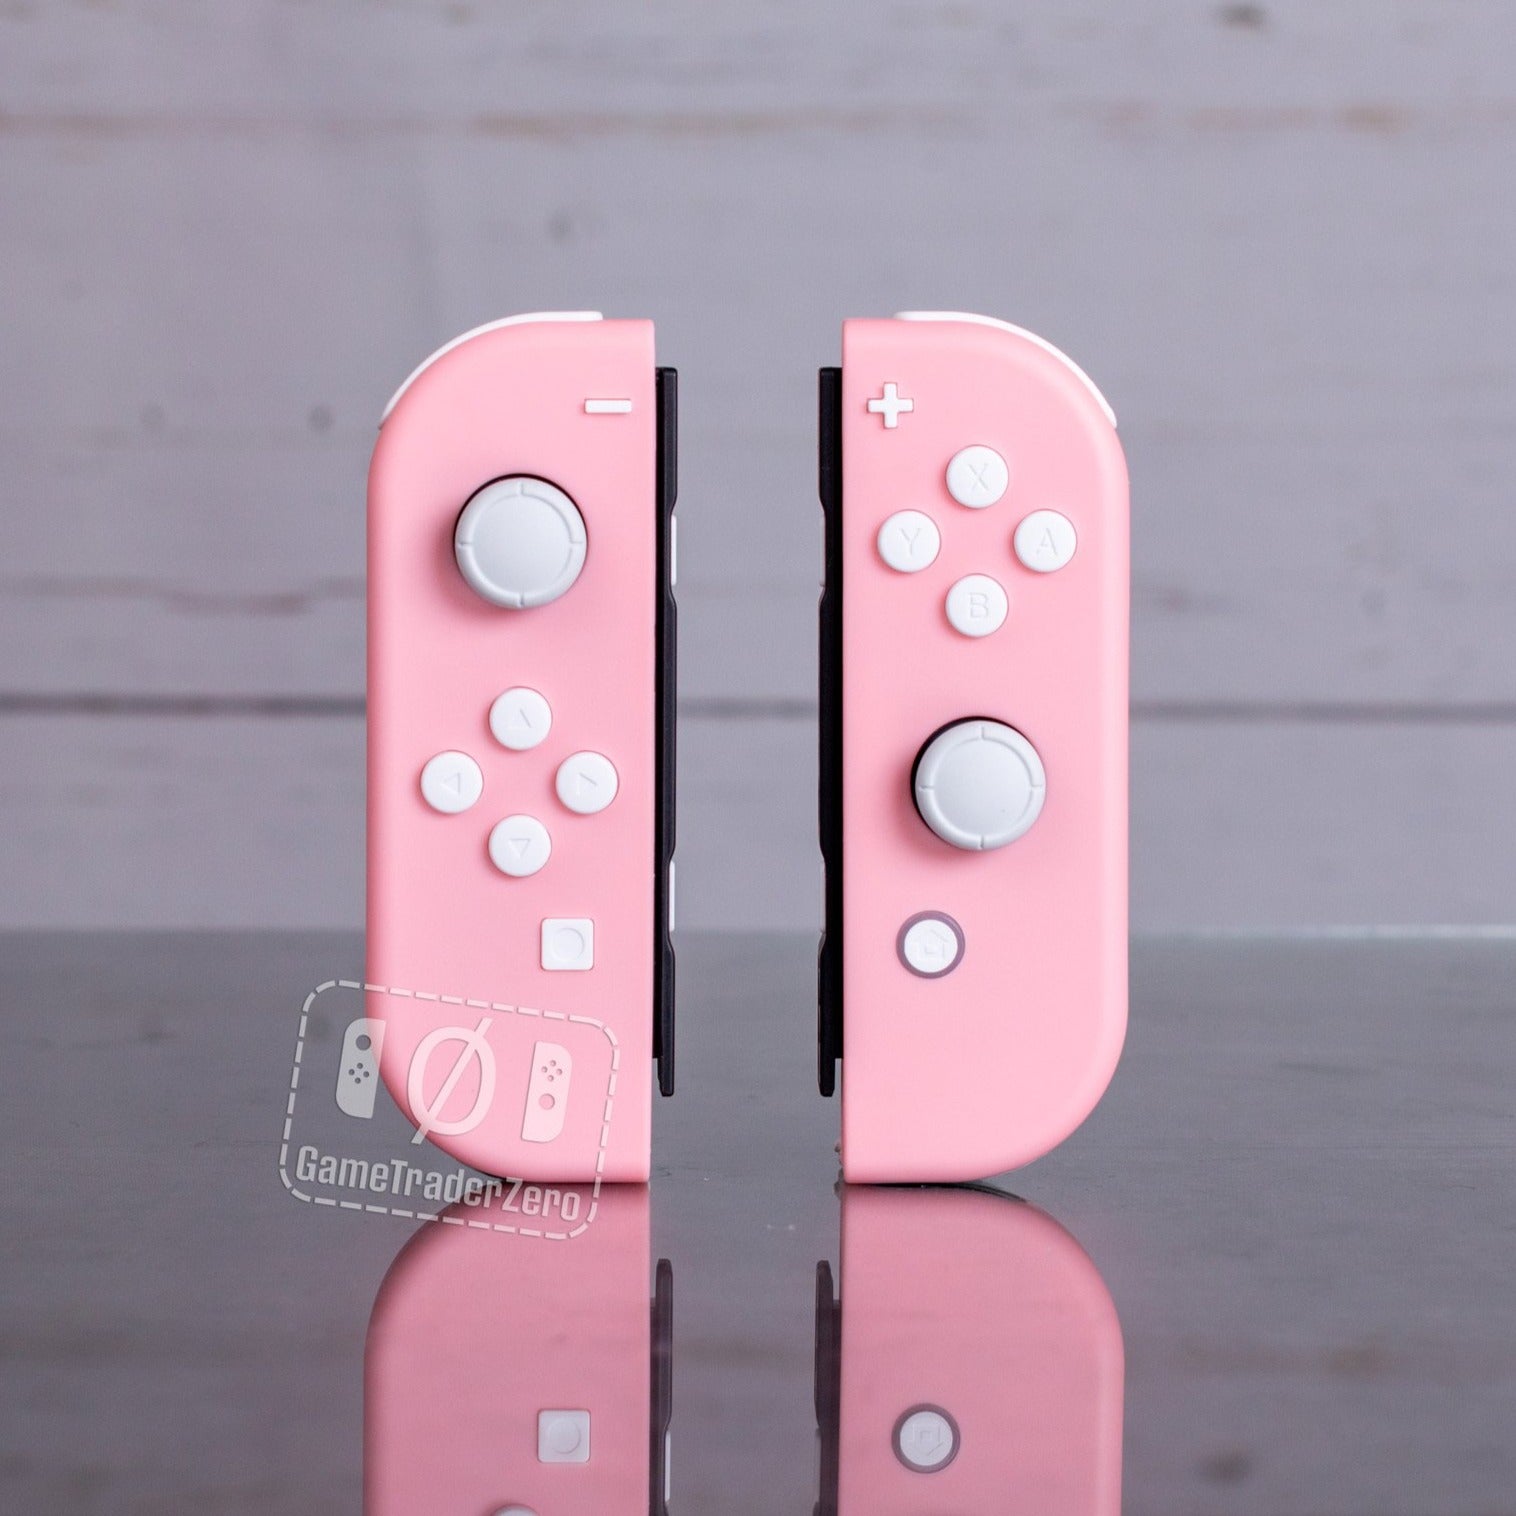 Custom Nintendo Switch Joy-Con Controllers Pink with White Buttons